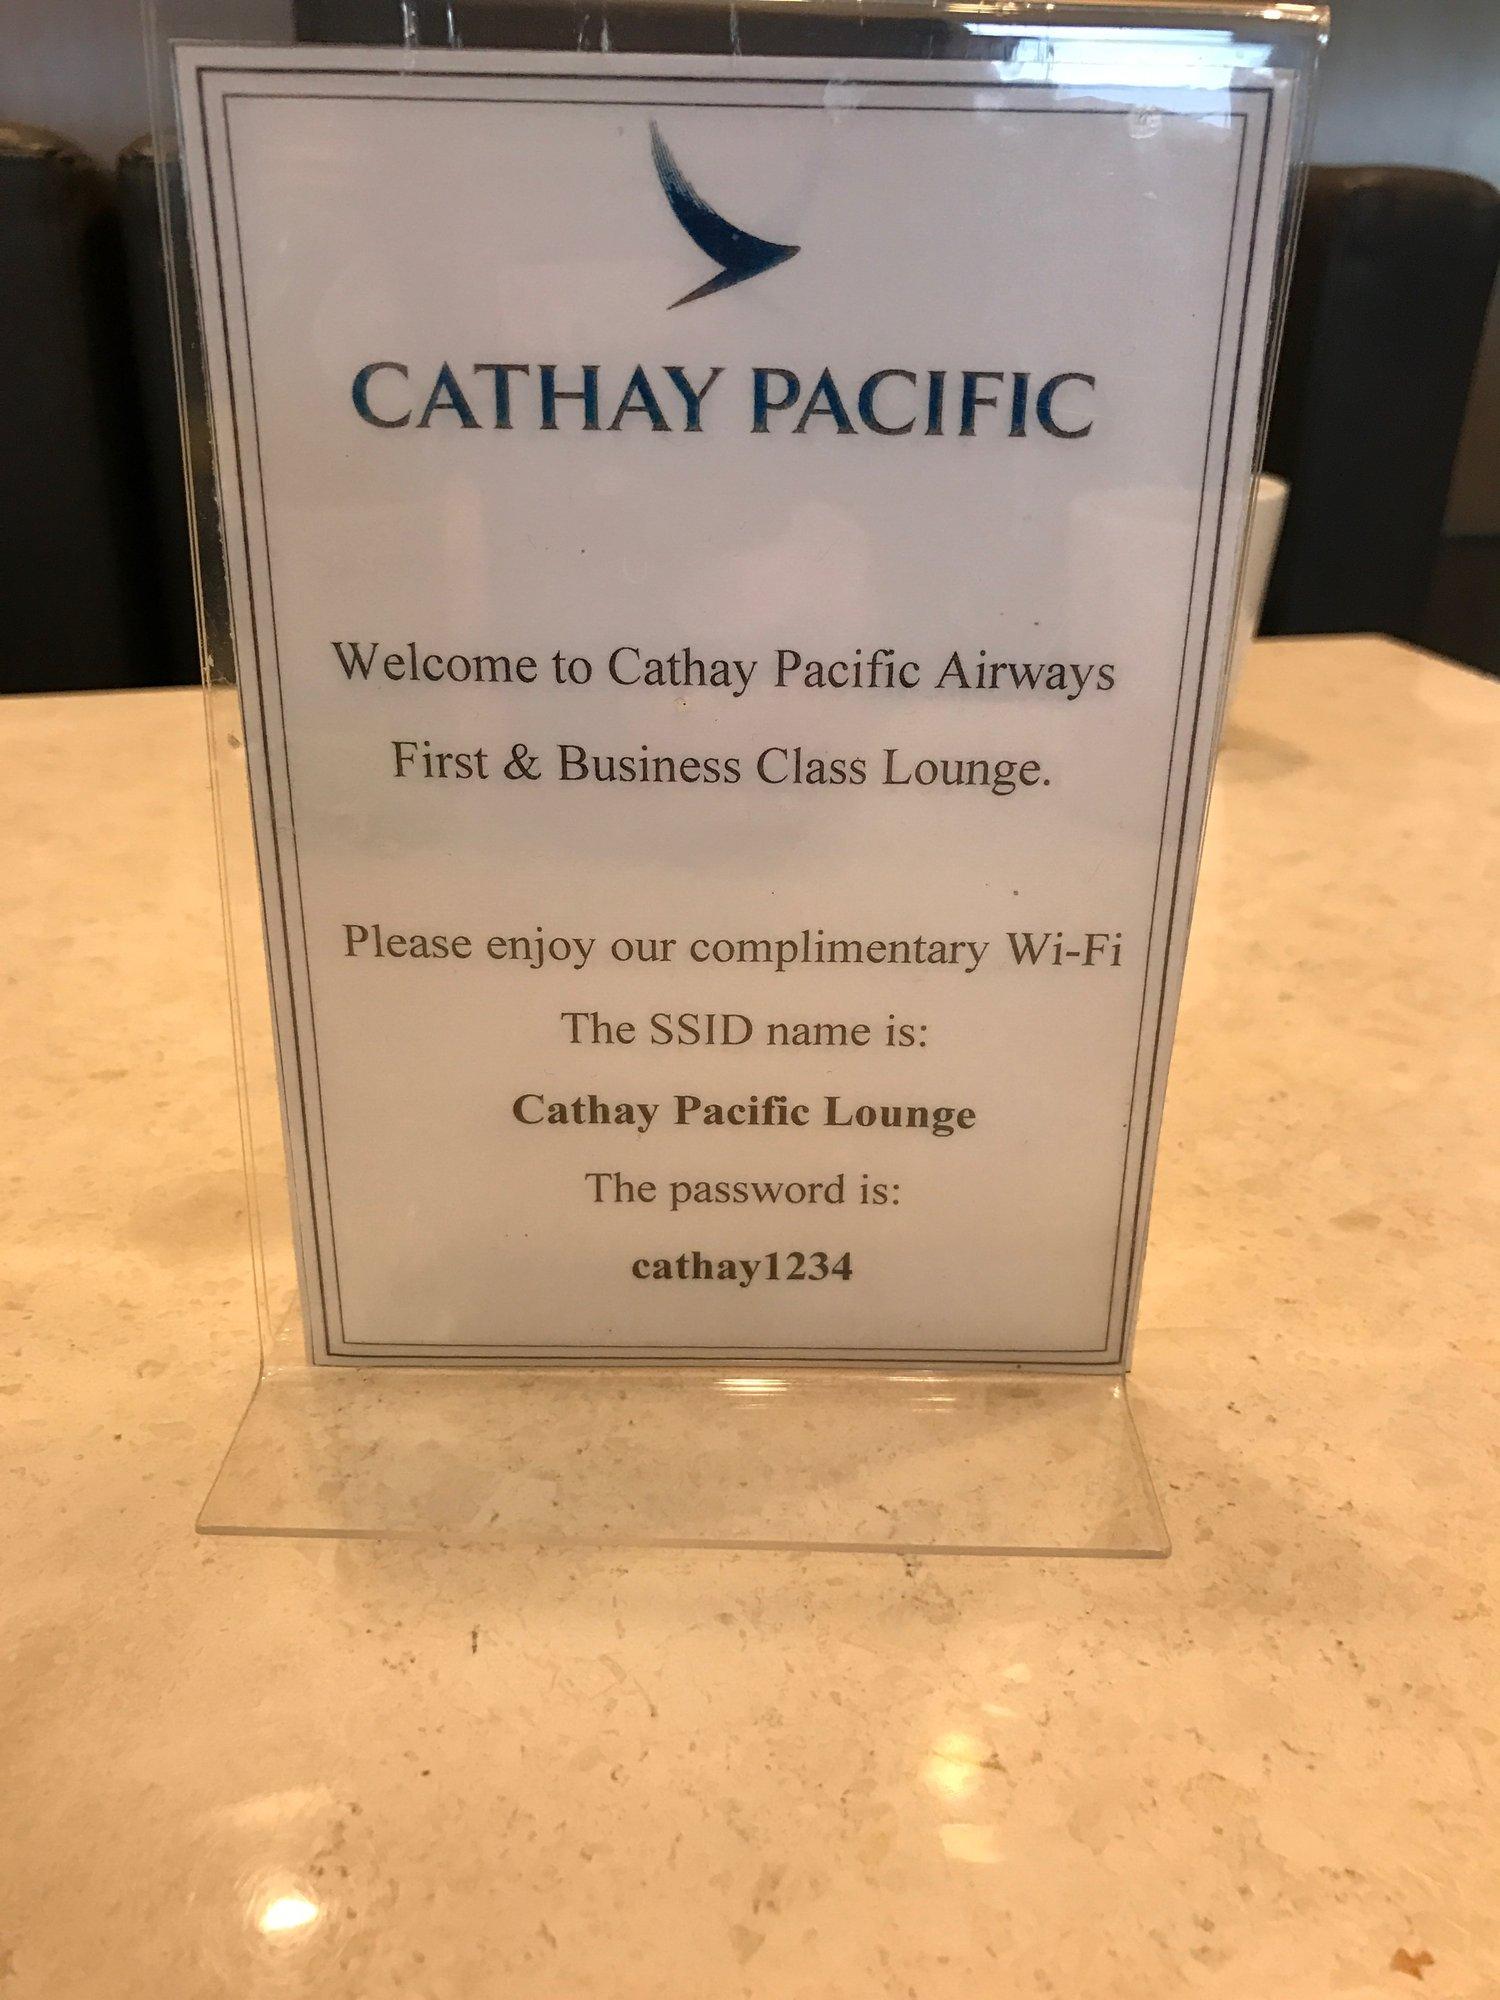 Cathay Pacific First and Business Class Lounge image 58 of 74